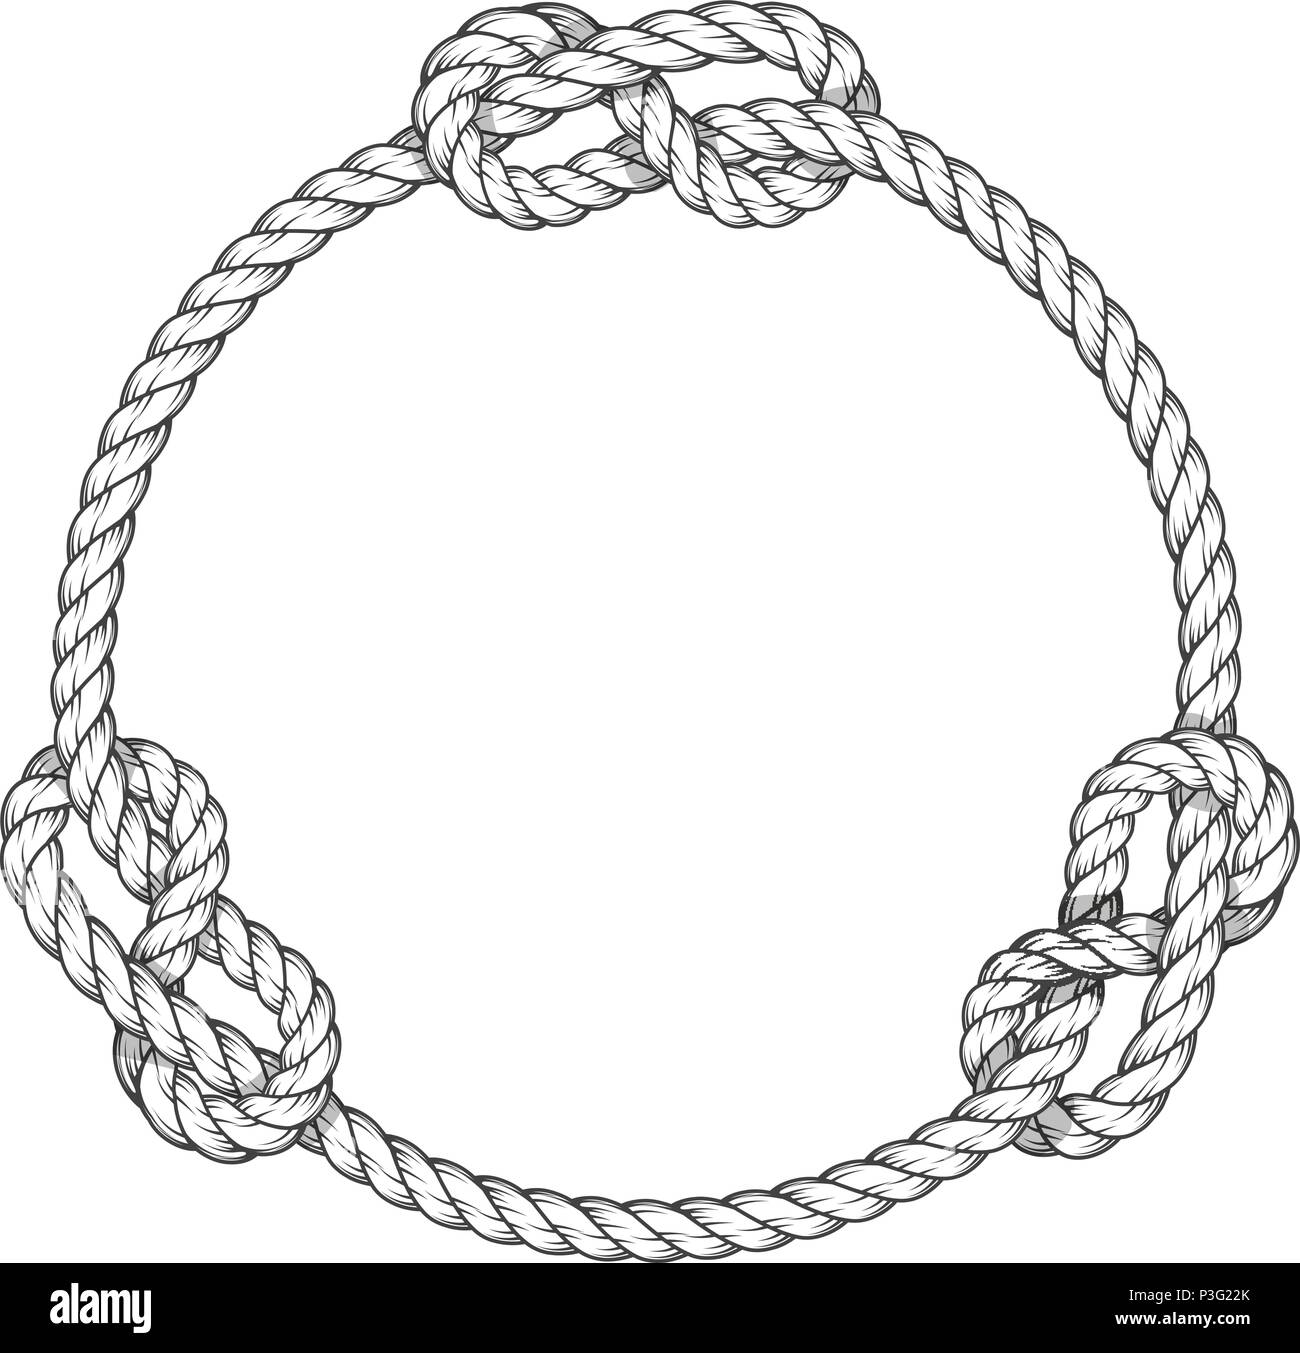 Rope circle - round rope frame with knots, vintage style Stock Vector